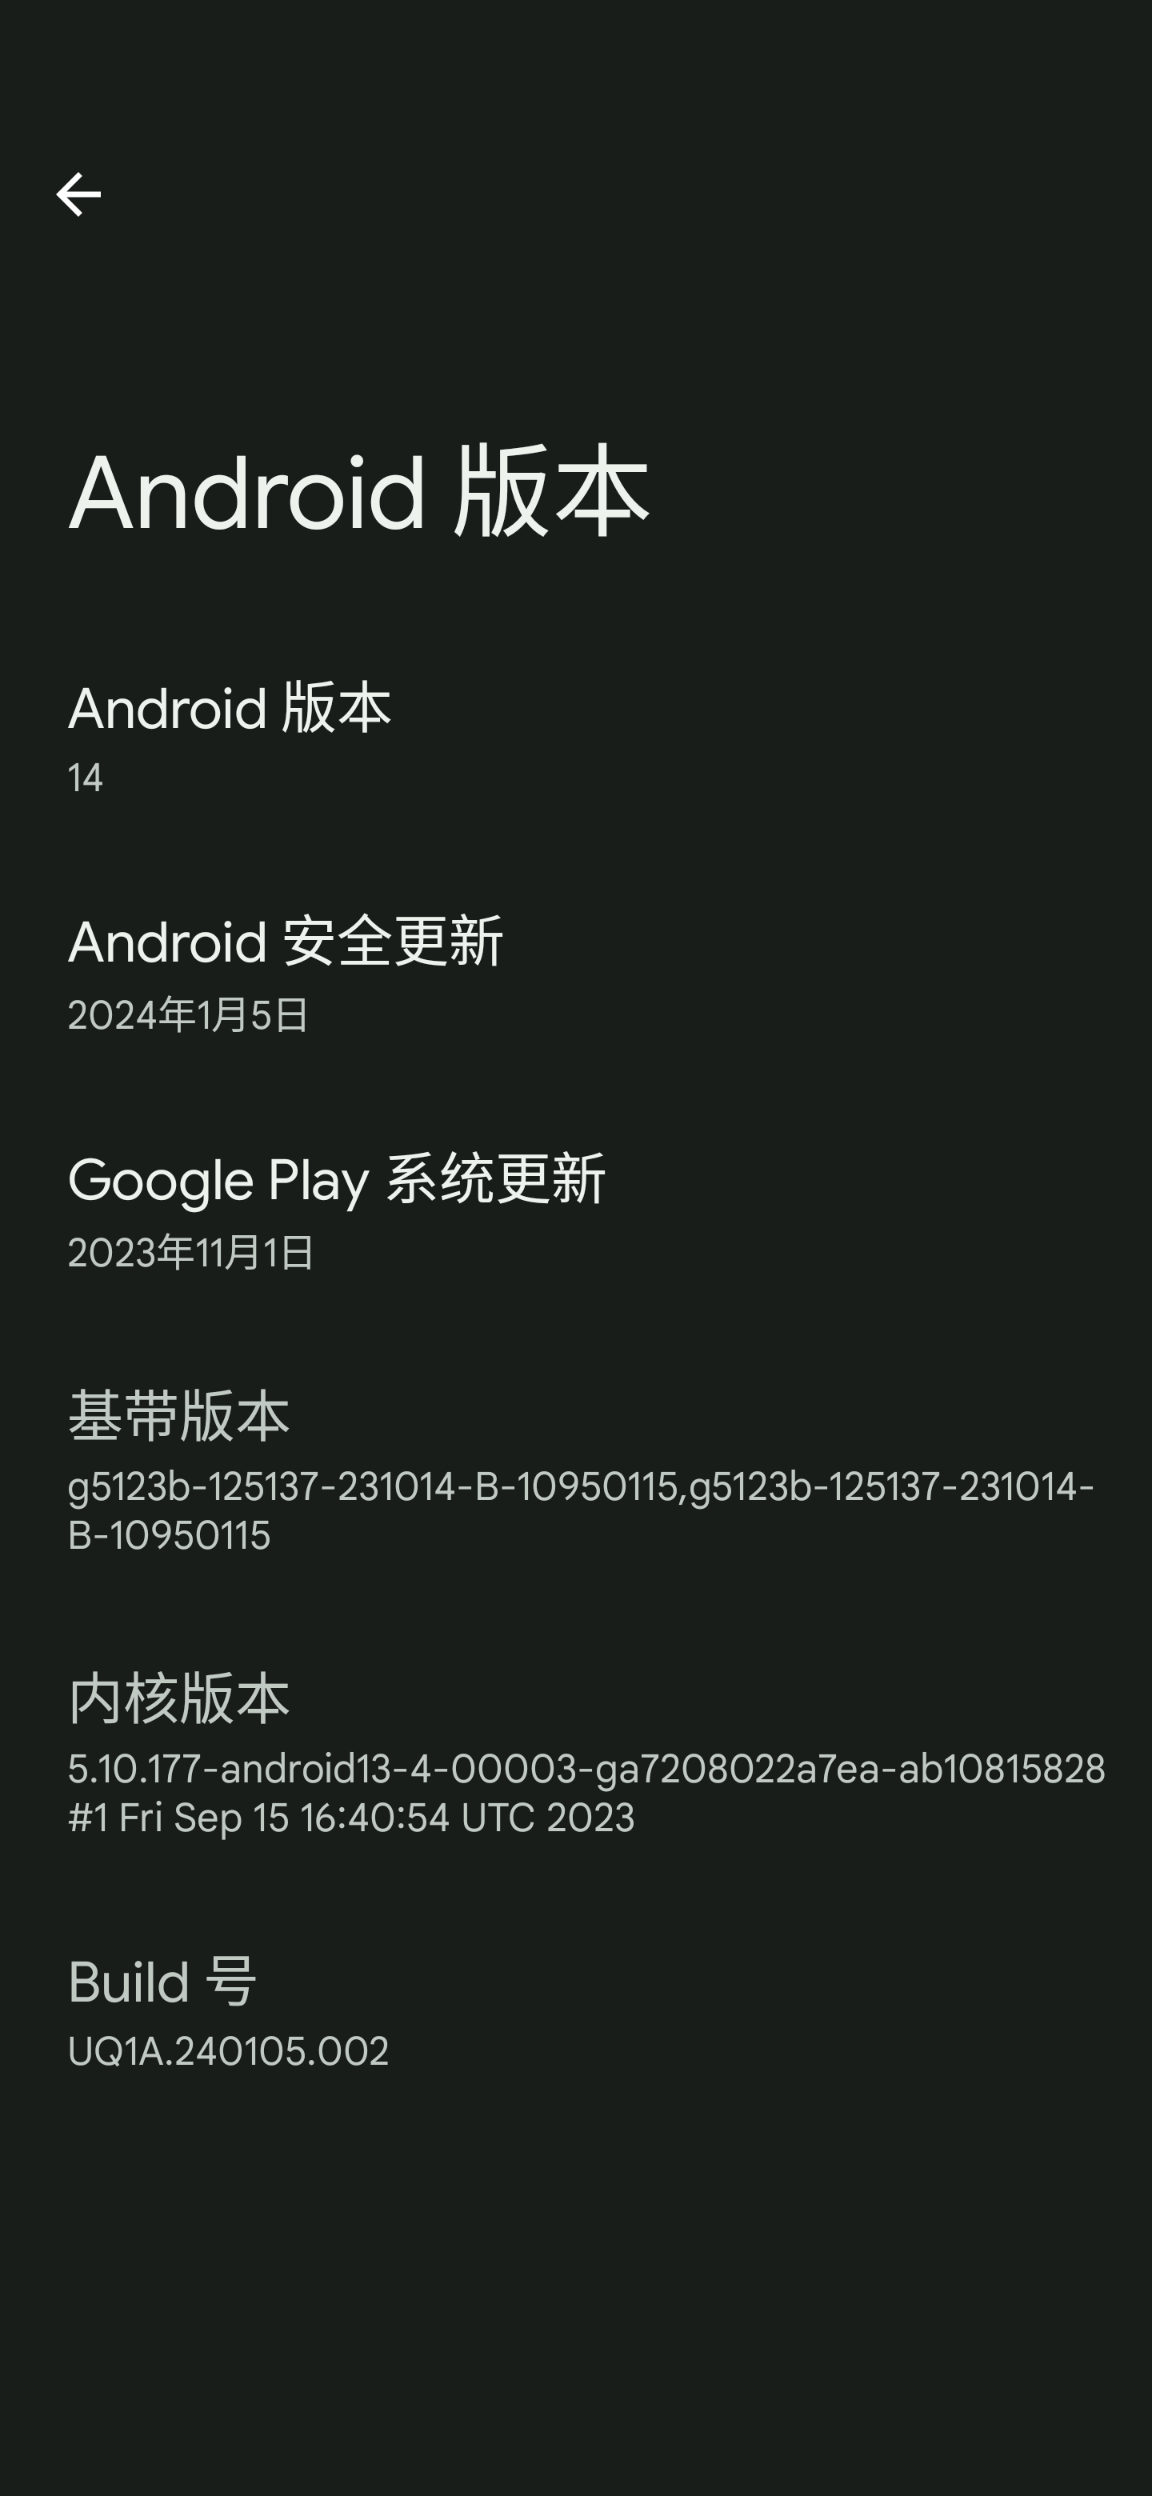 Android version